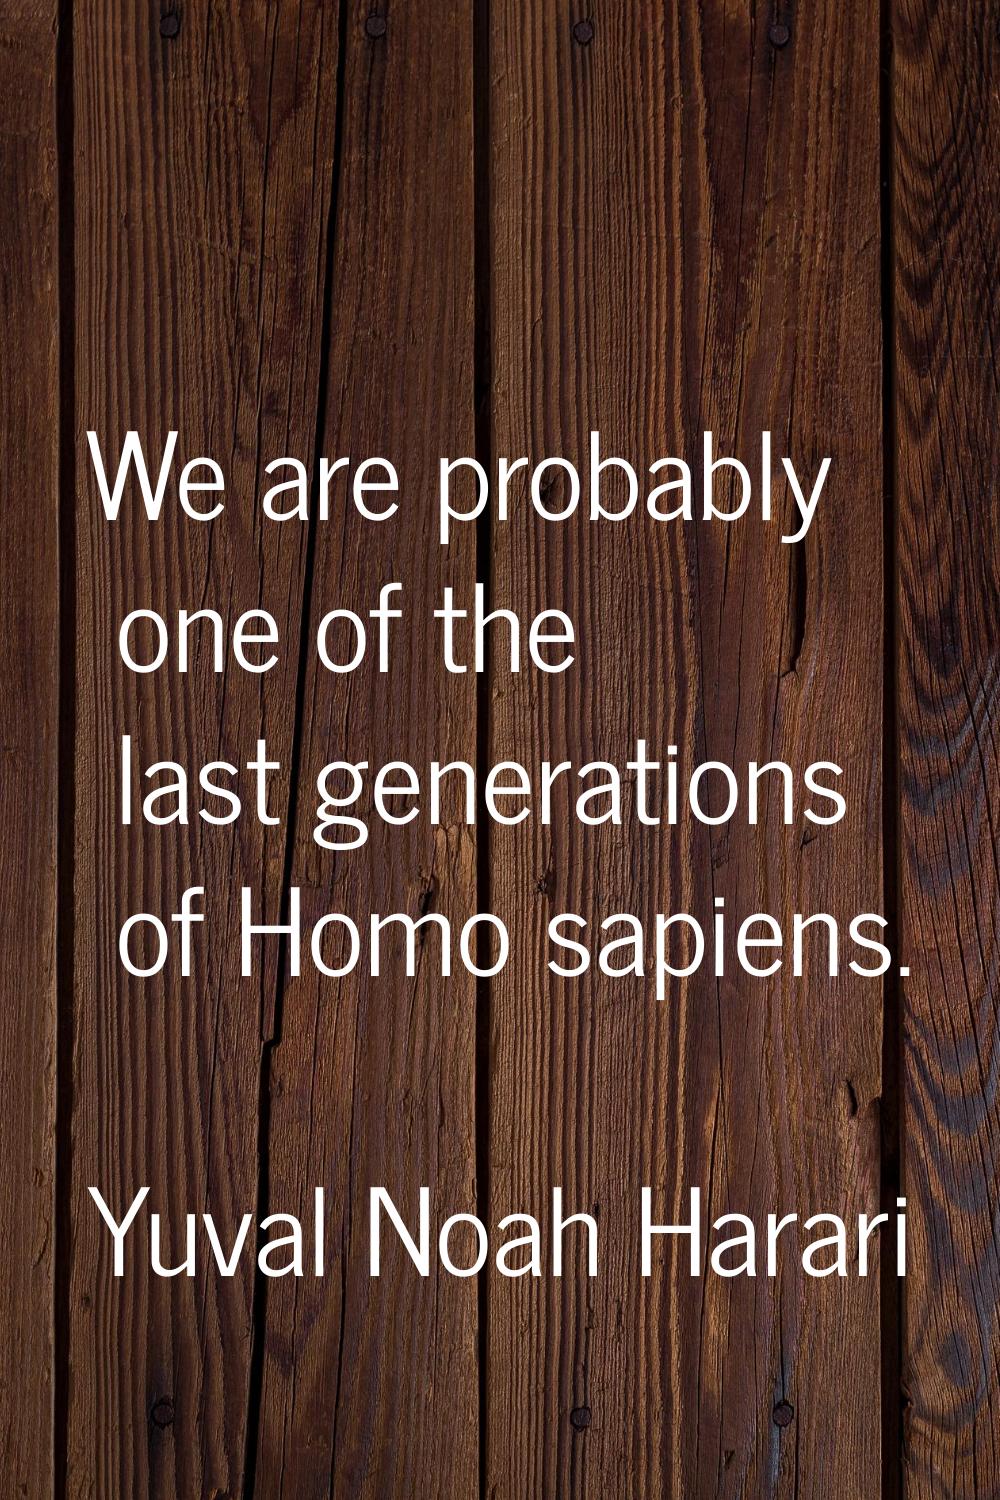 We are probably one of the last generations of Homo sapiens.